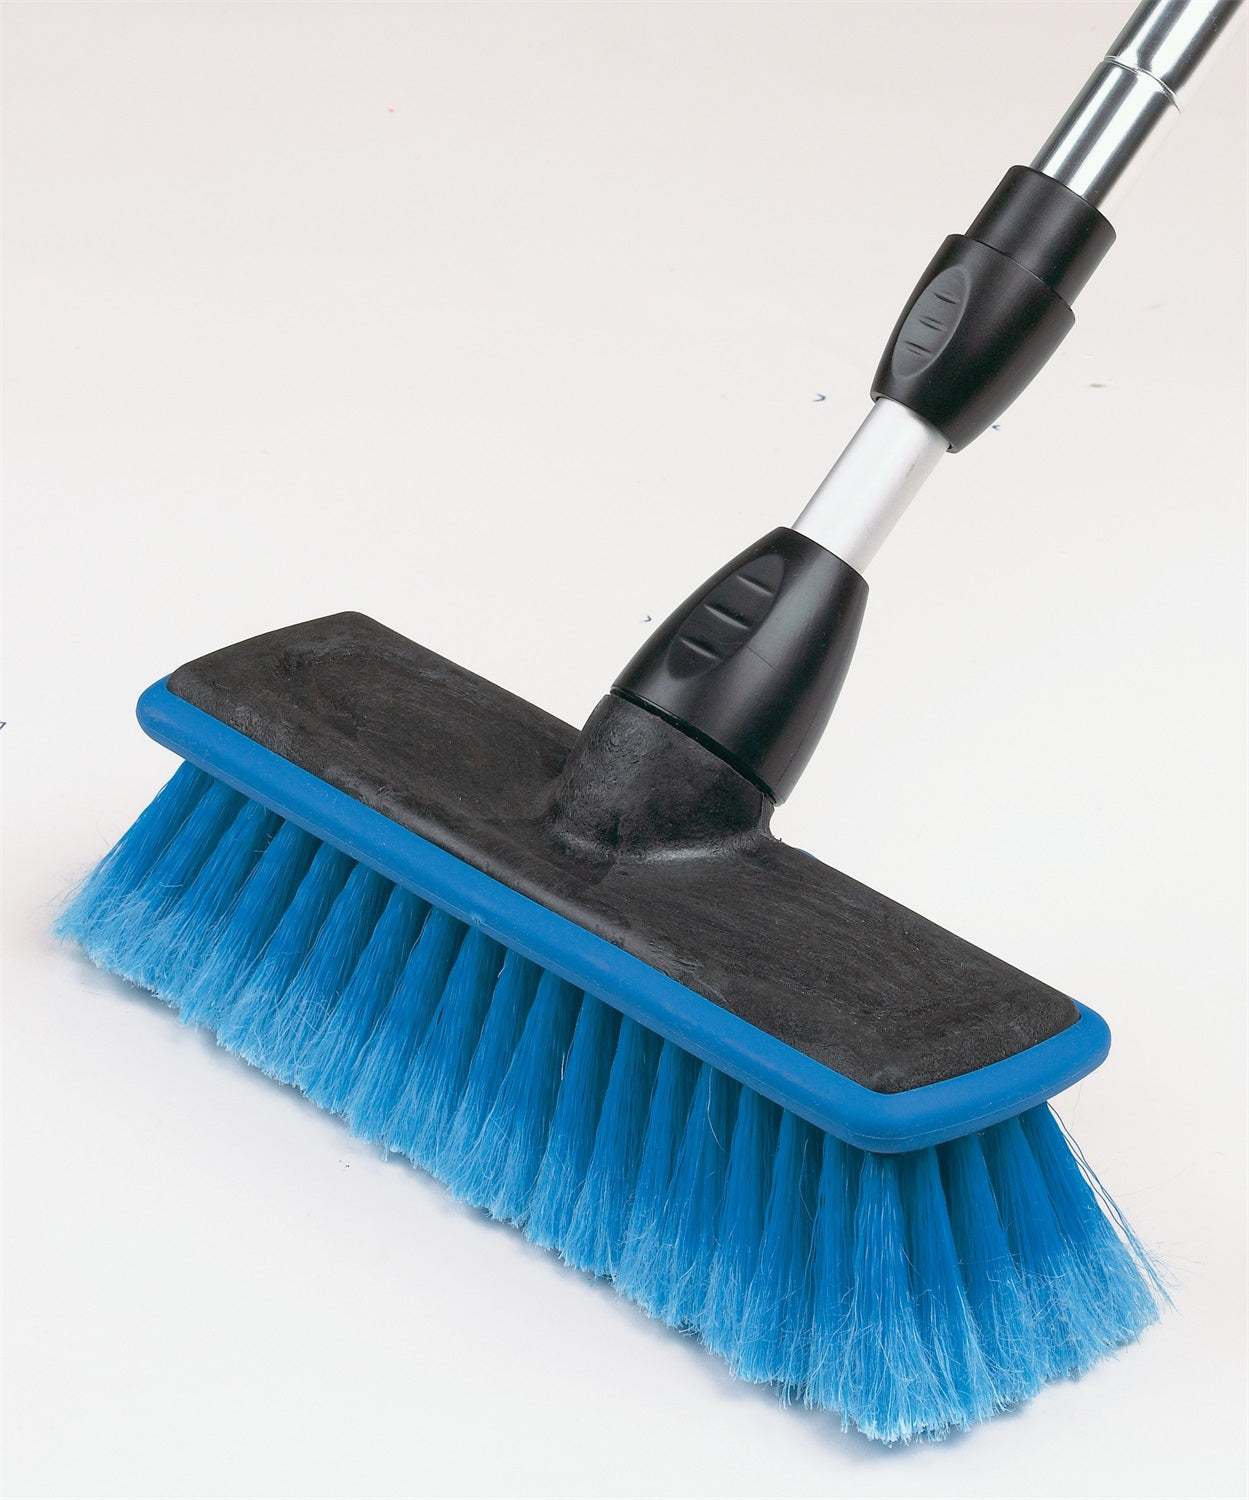 Carrand 93089A Deluxe Flow-Thru Wash Brush